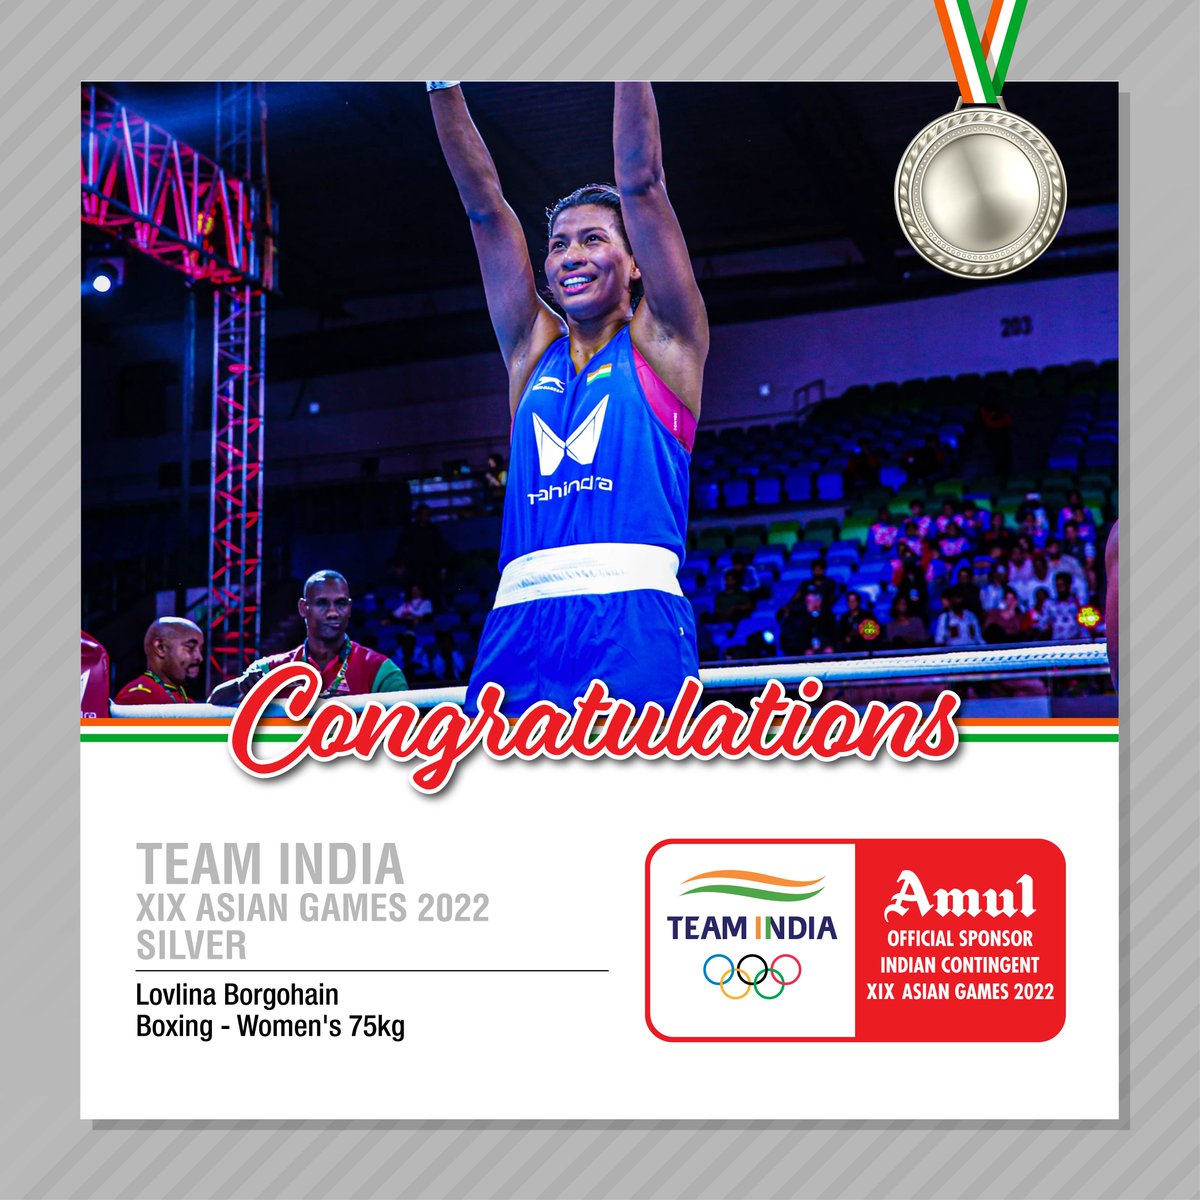 Congratulations to India’s Lovlina Borgohain for attaining a silver medal in the women’s 75kg boxing category at the Asian Games. What a performance!
#Cheer4India #Amul #AsianGames #Boxing #Silver